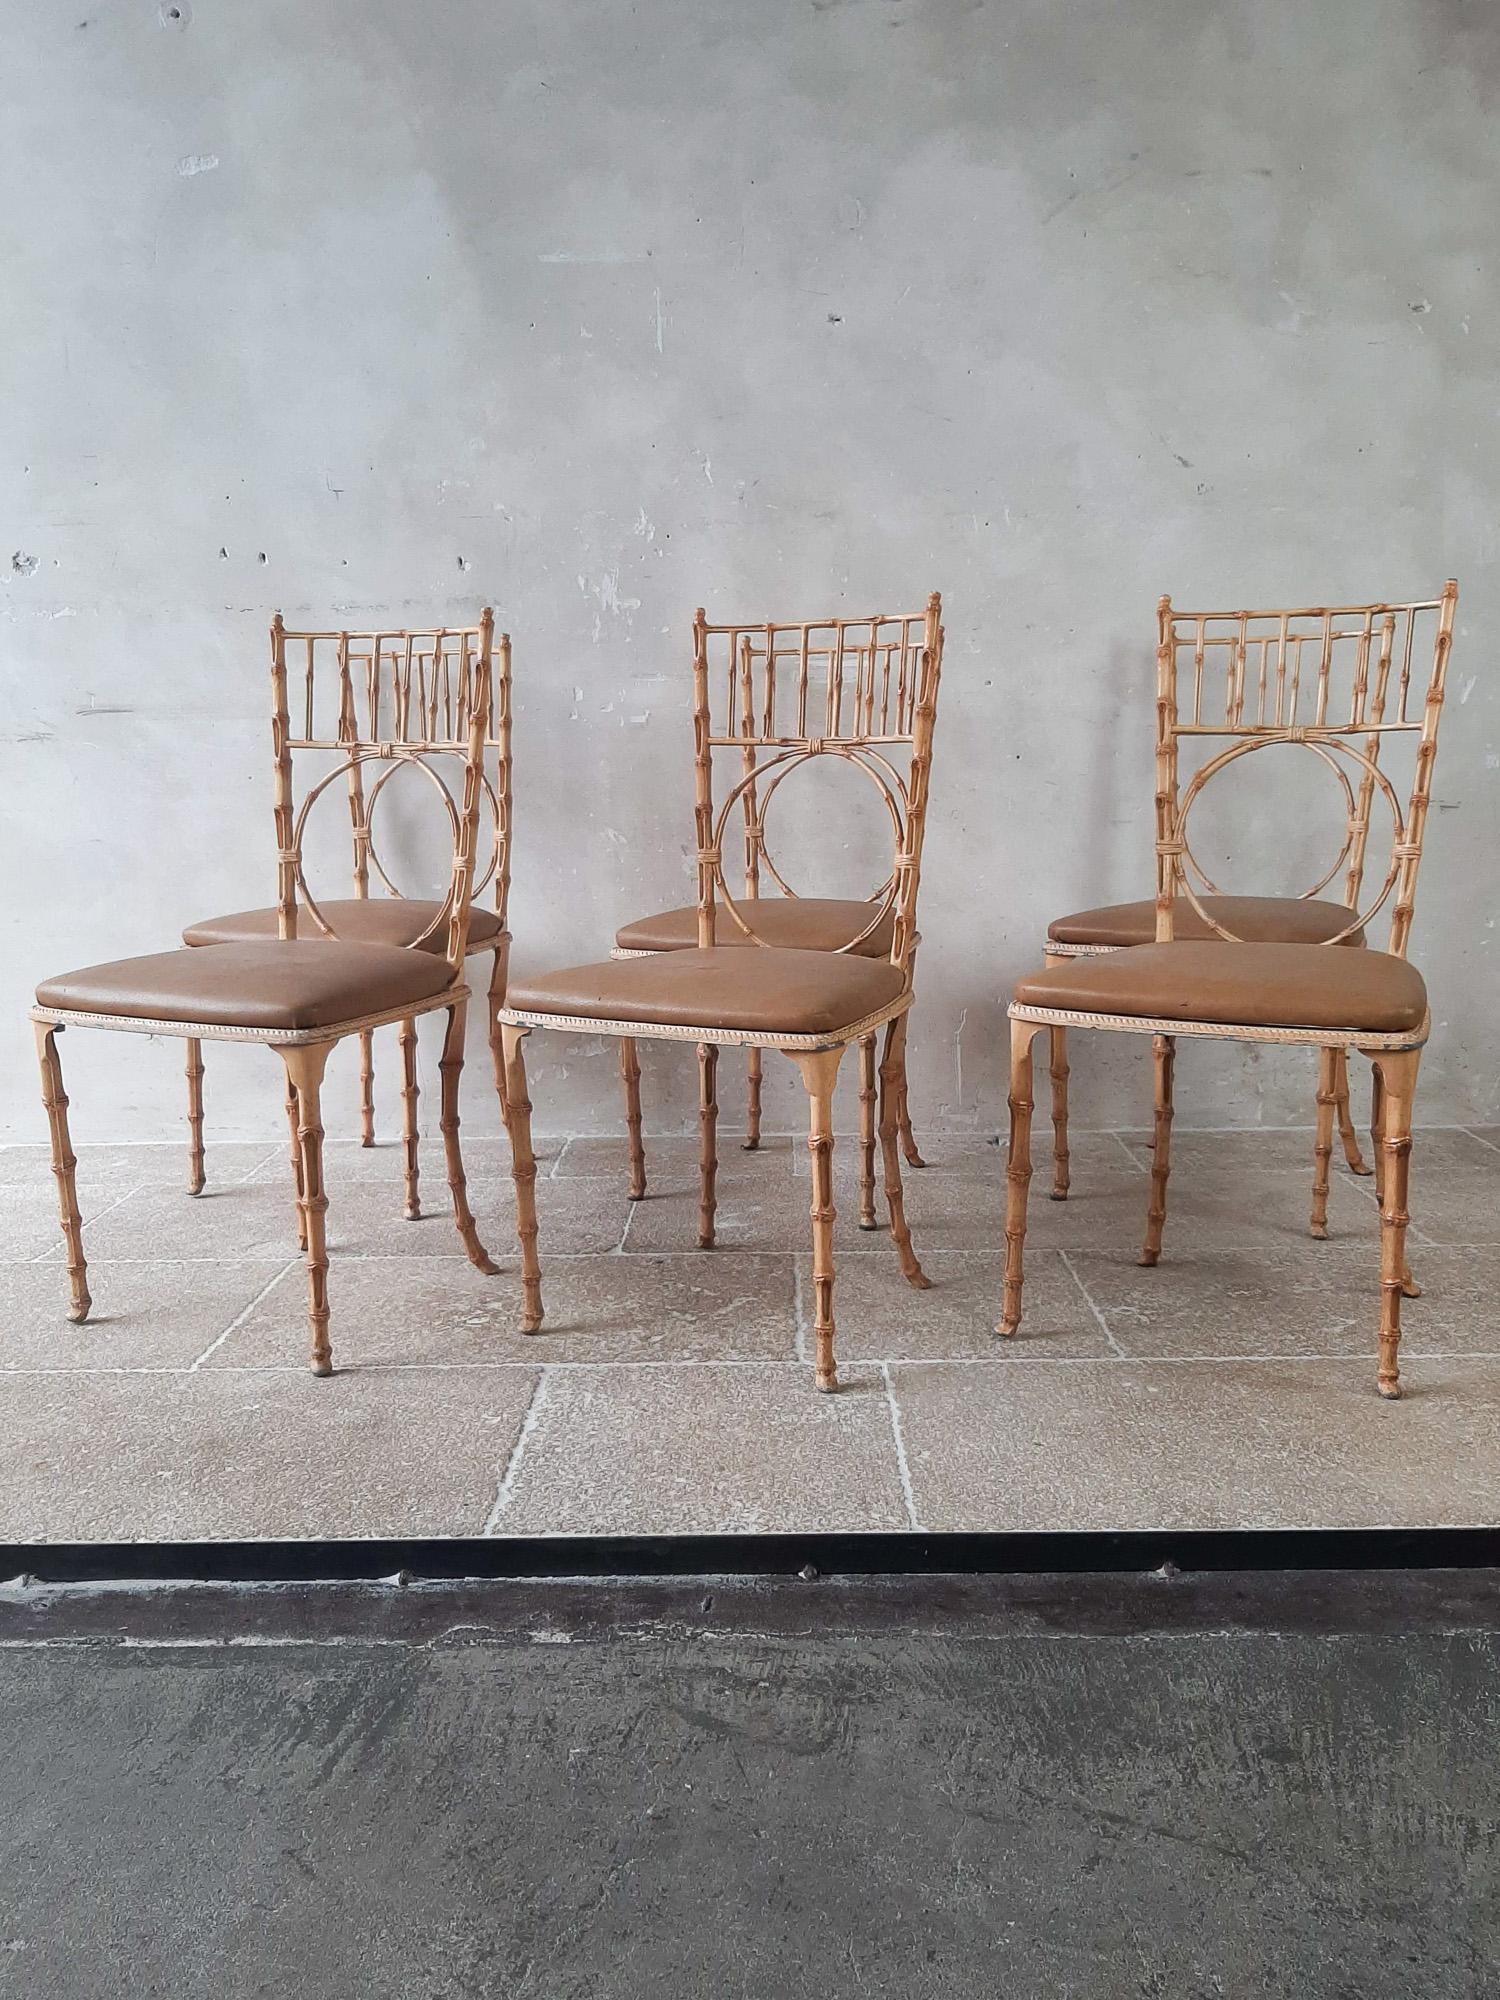 Set of 6 Midcentury Faux Bamboo Aluminium Painted Dining Chairs, 1950s For Sale 4